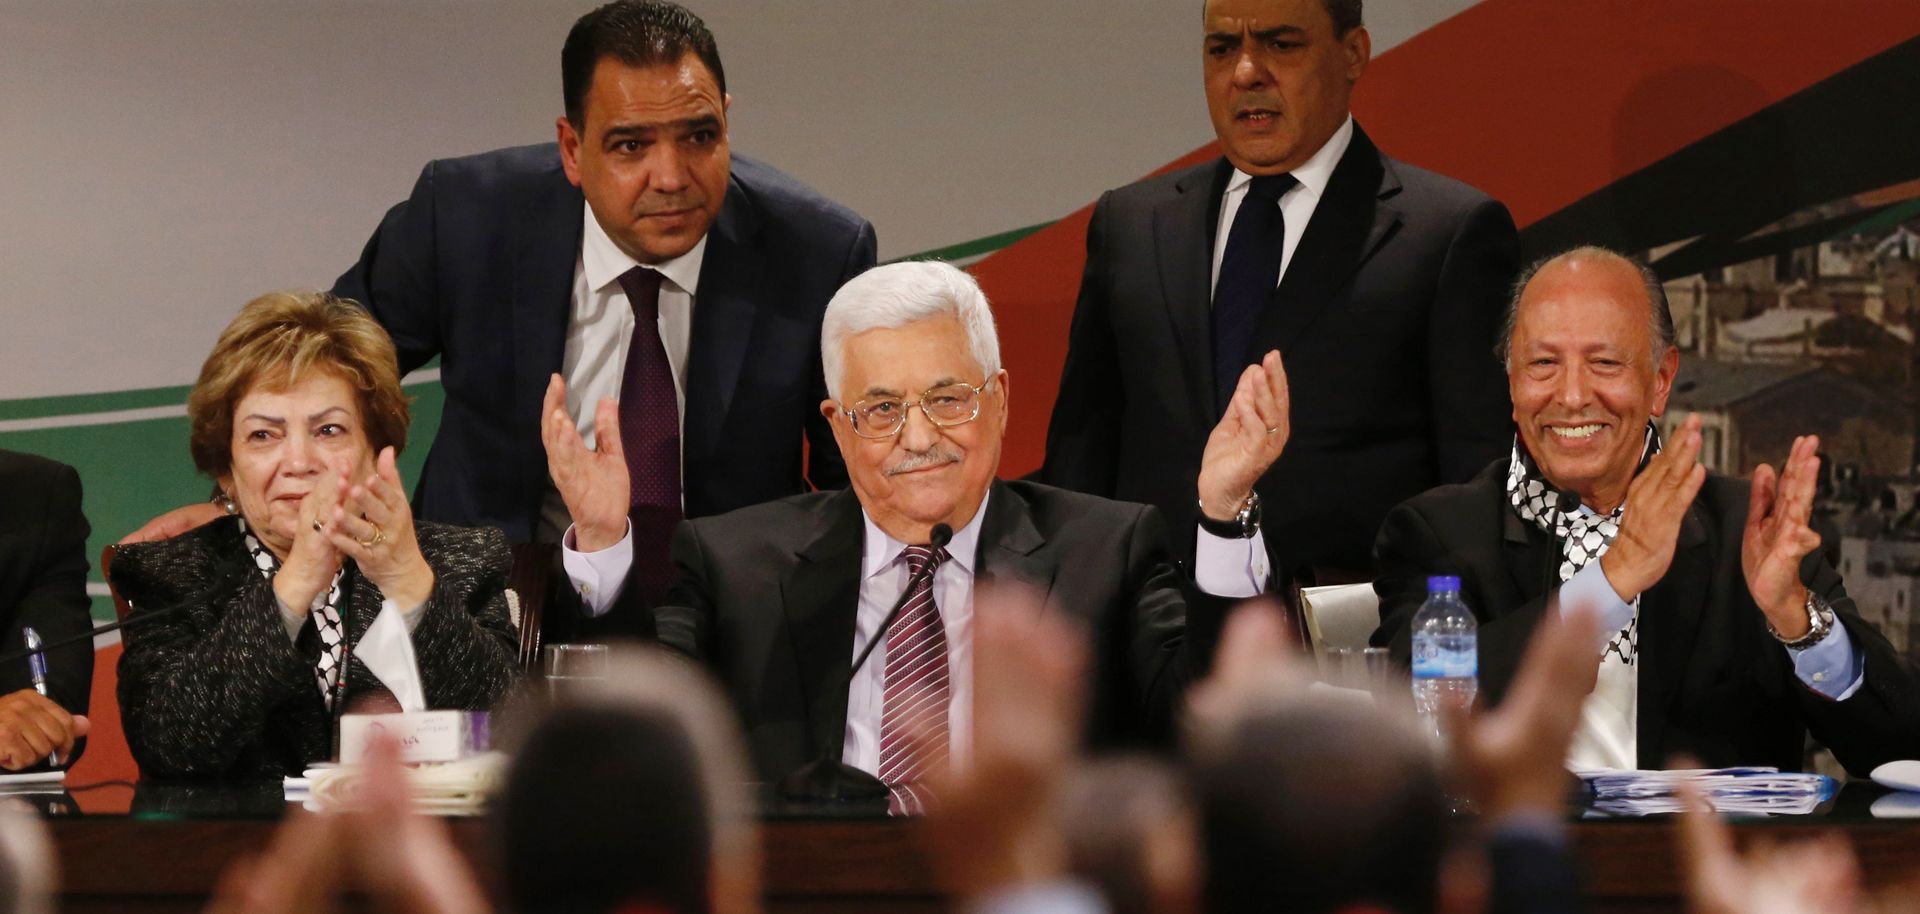 Hamas and Fatah: In Transition but No Less Divided